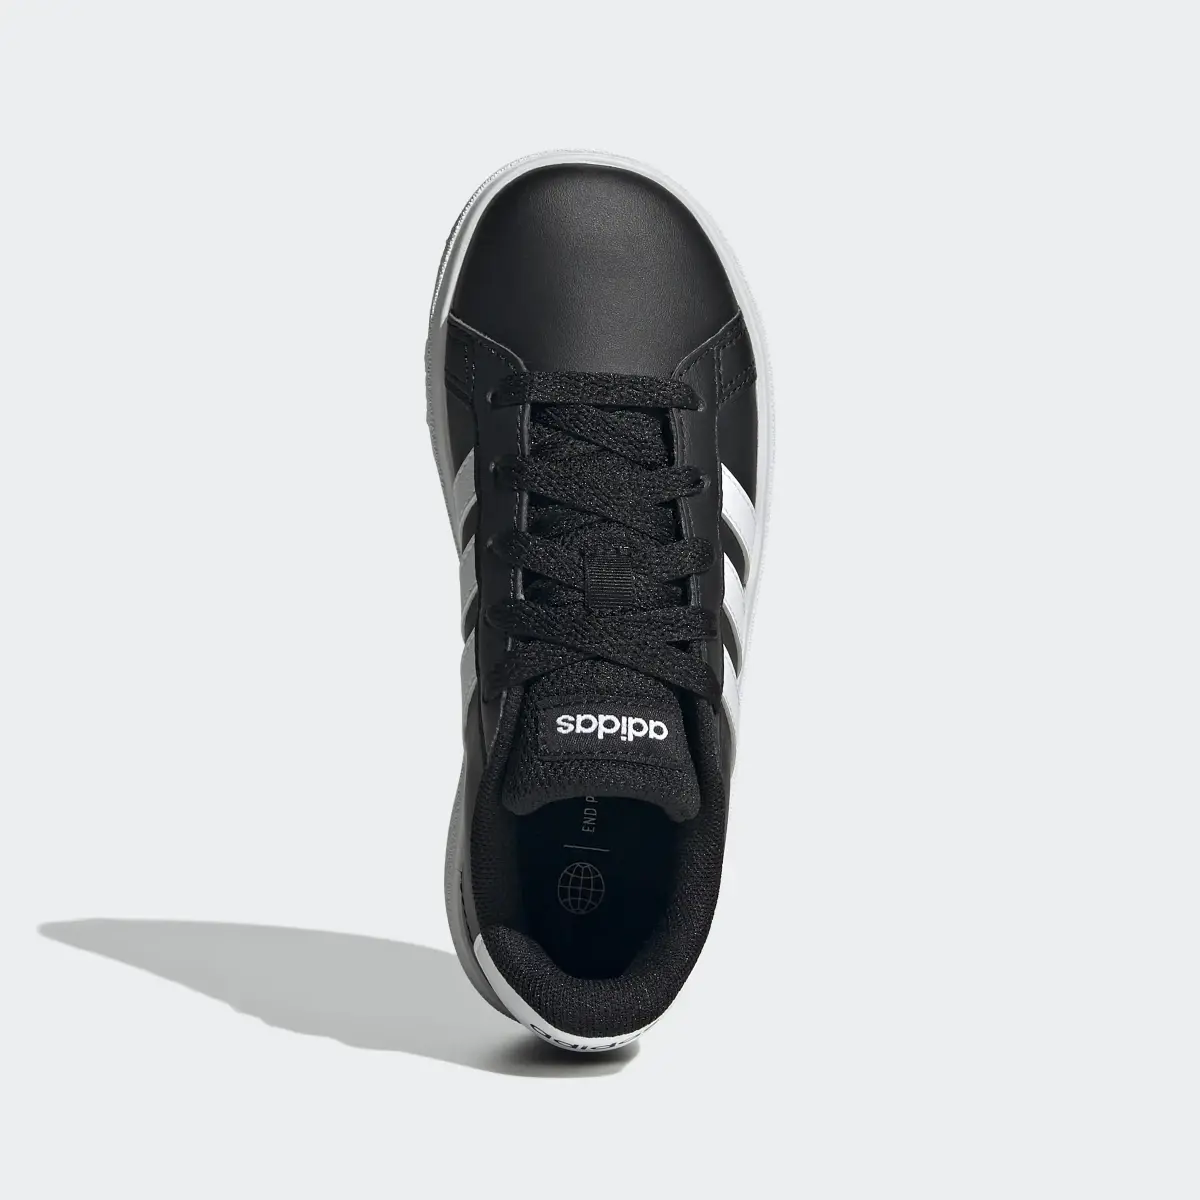 Adidas Buty Grand Court Lifestyle Tennis Lace-Up. 3